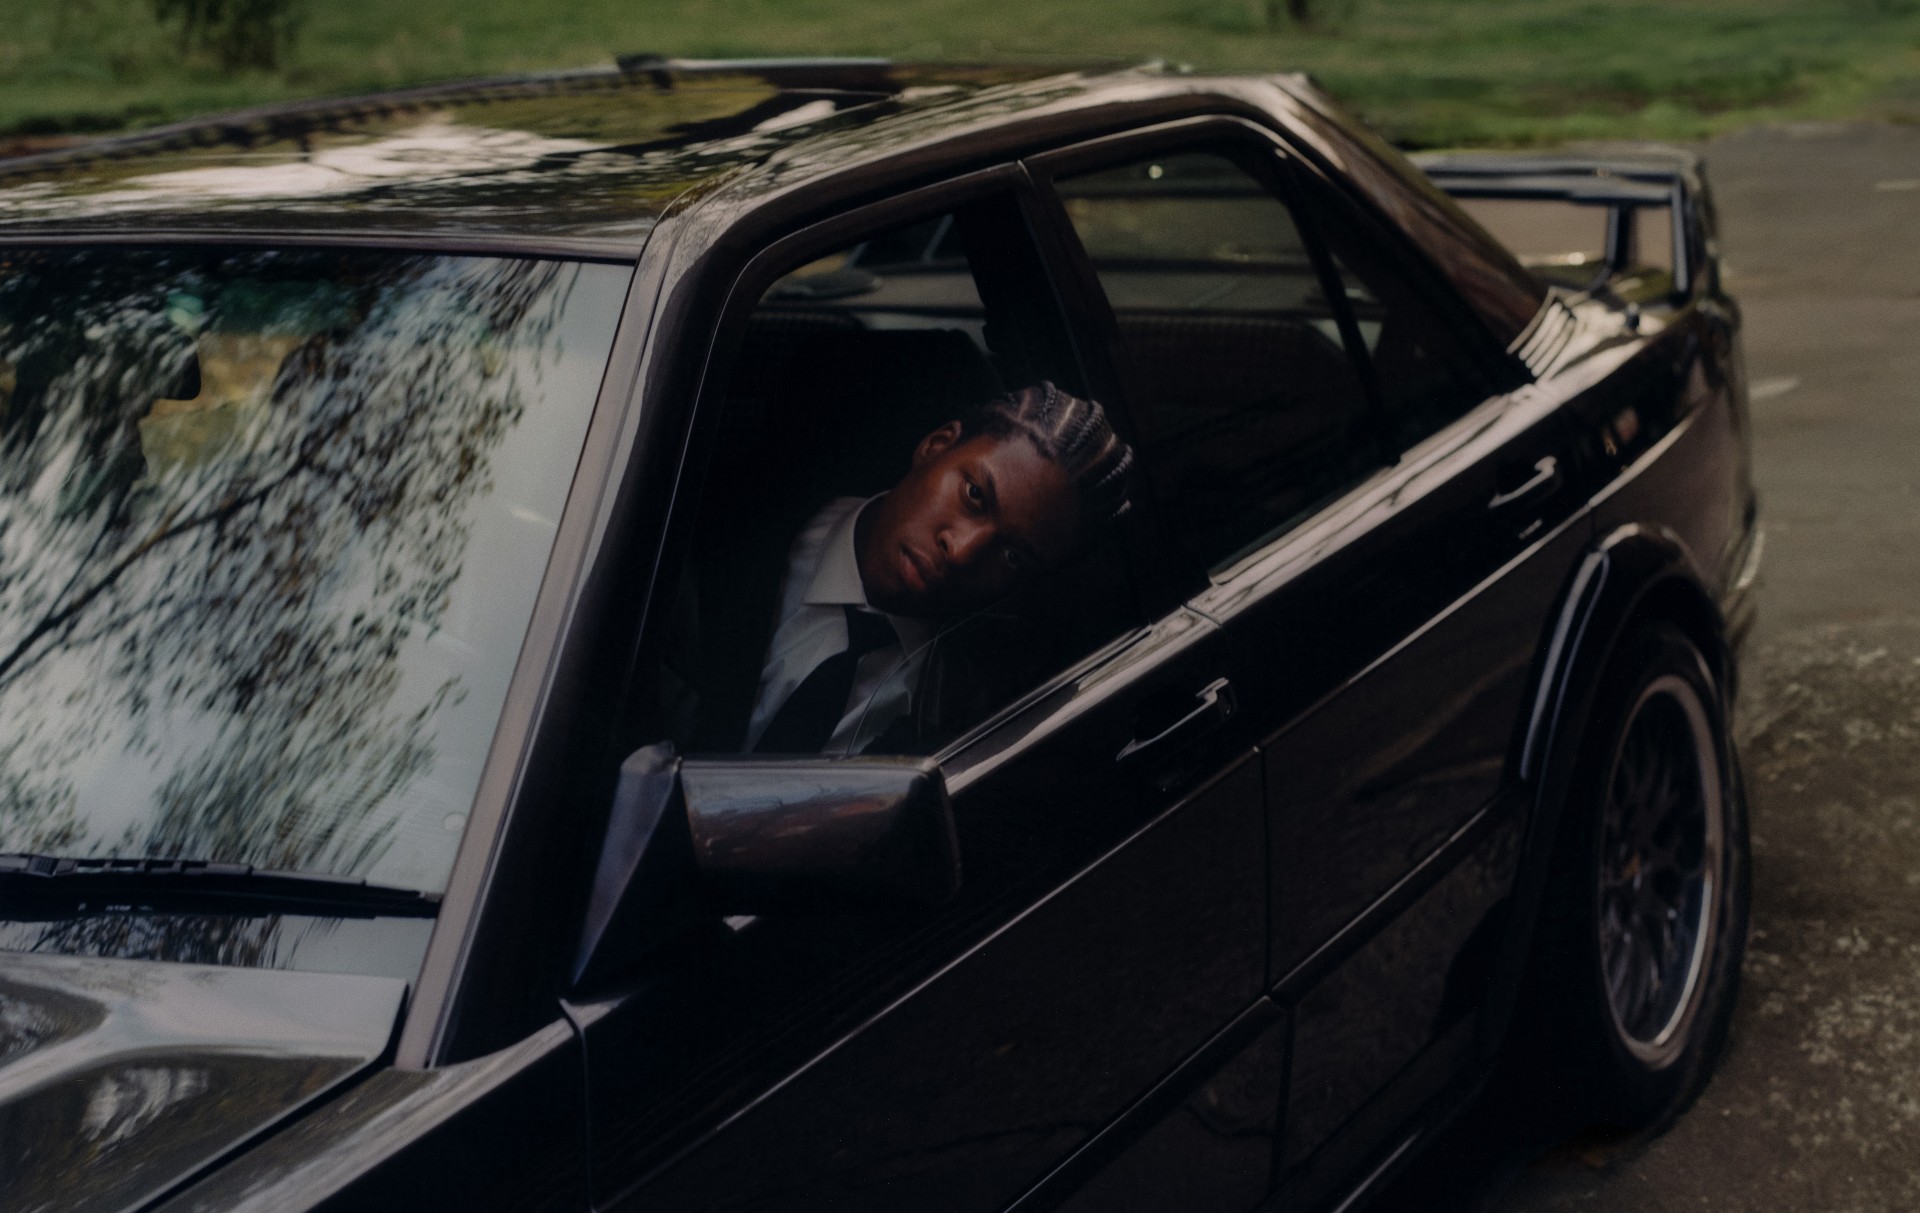 Review: 'NEVER ENOUGH' is Daniel Caesar's most intimate project to date